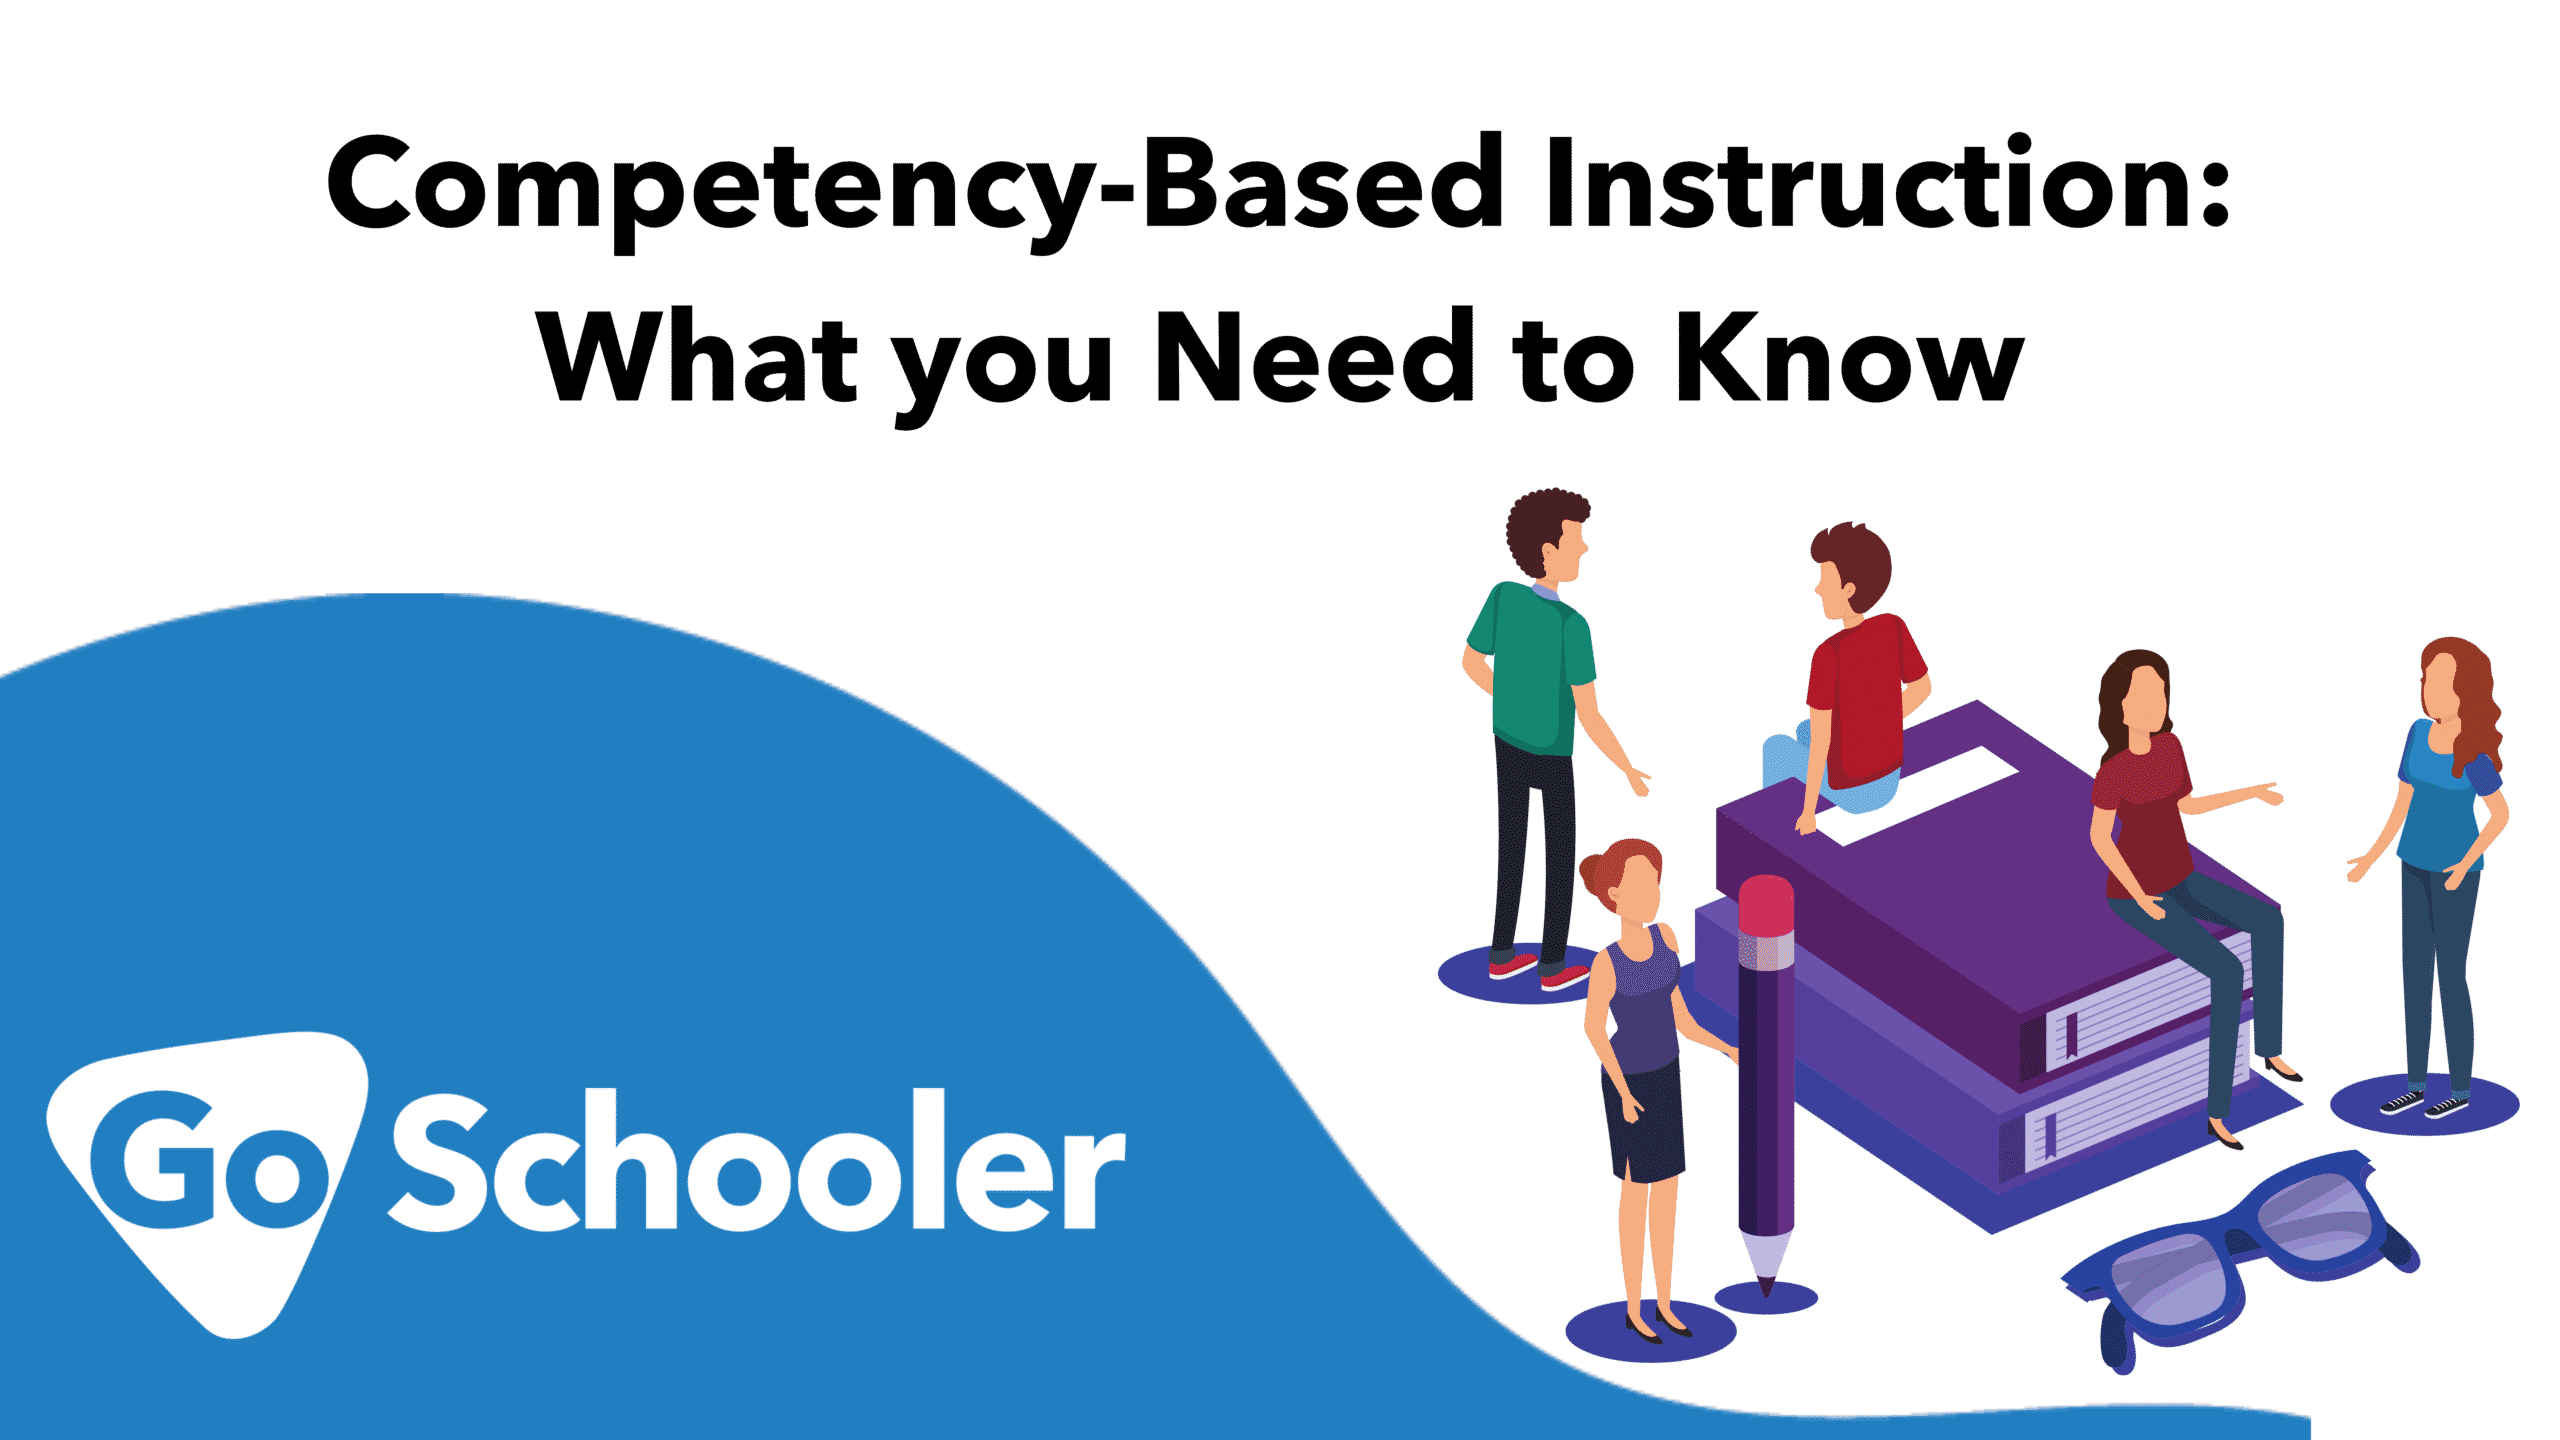 Competency-Based Instruction